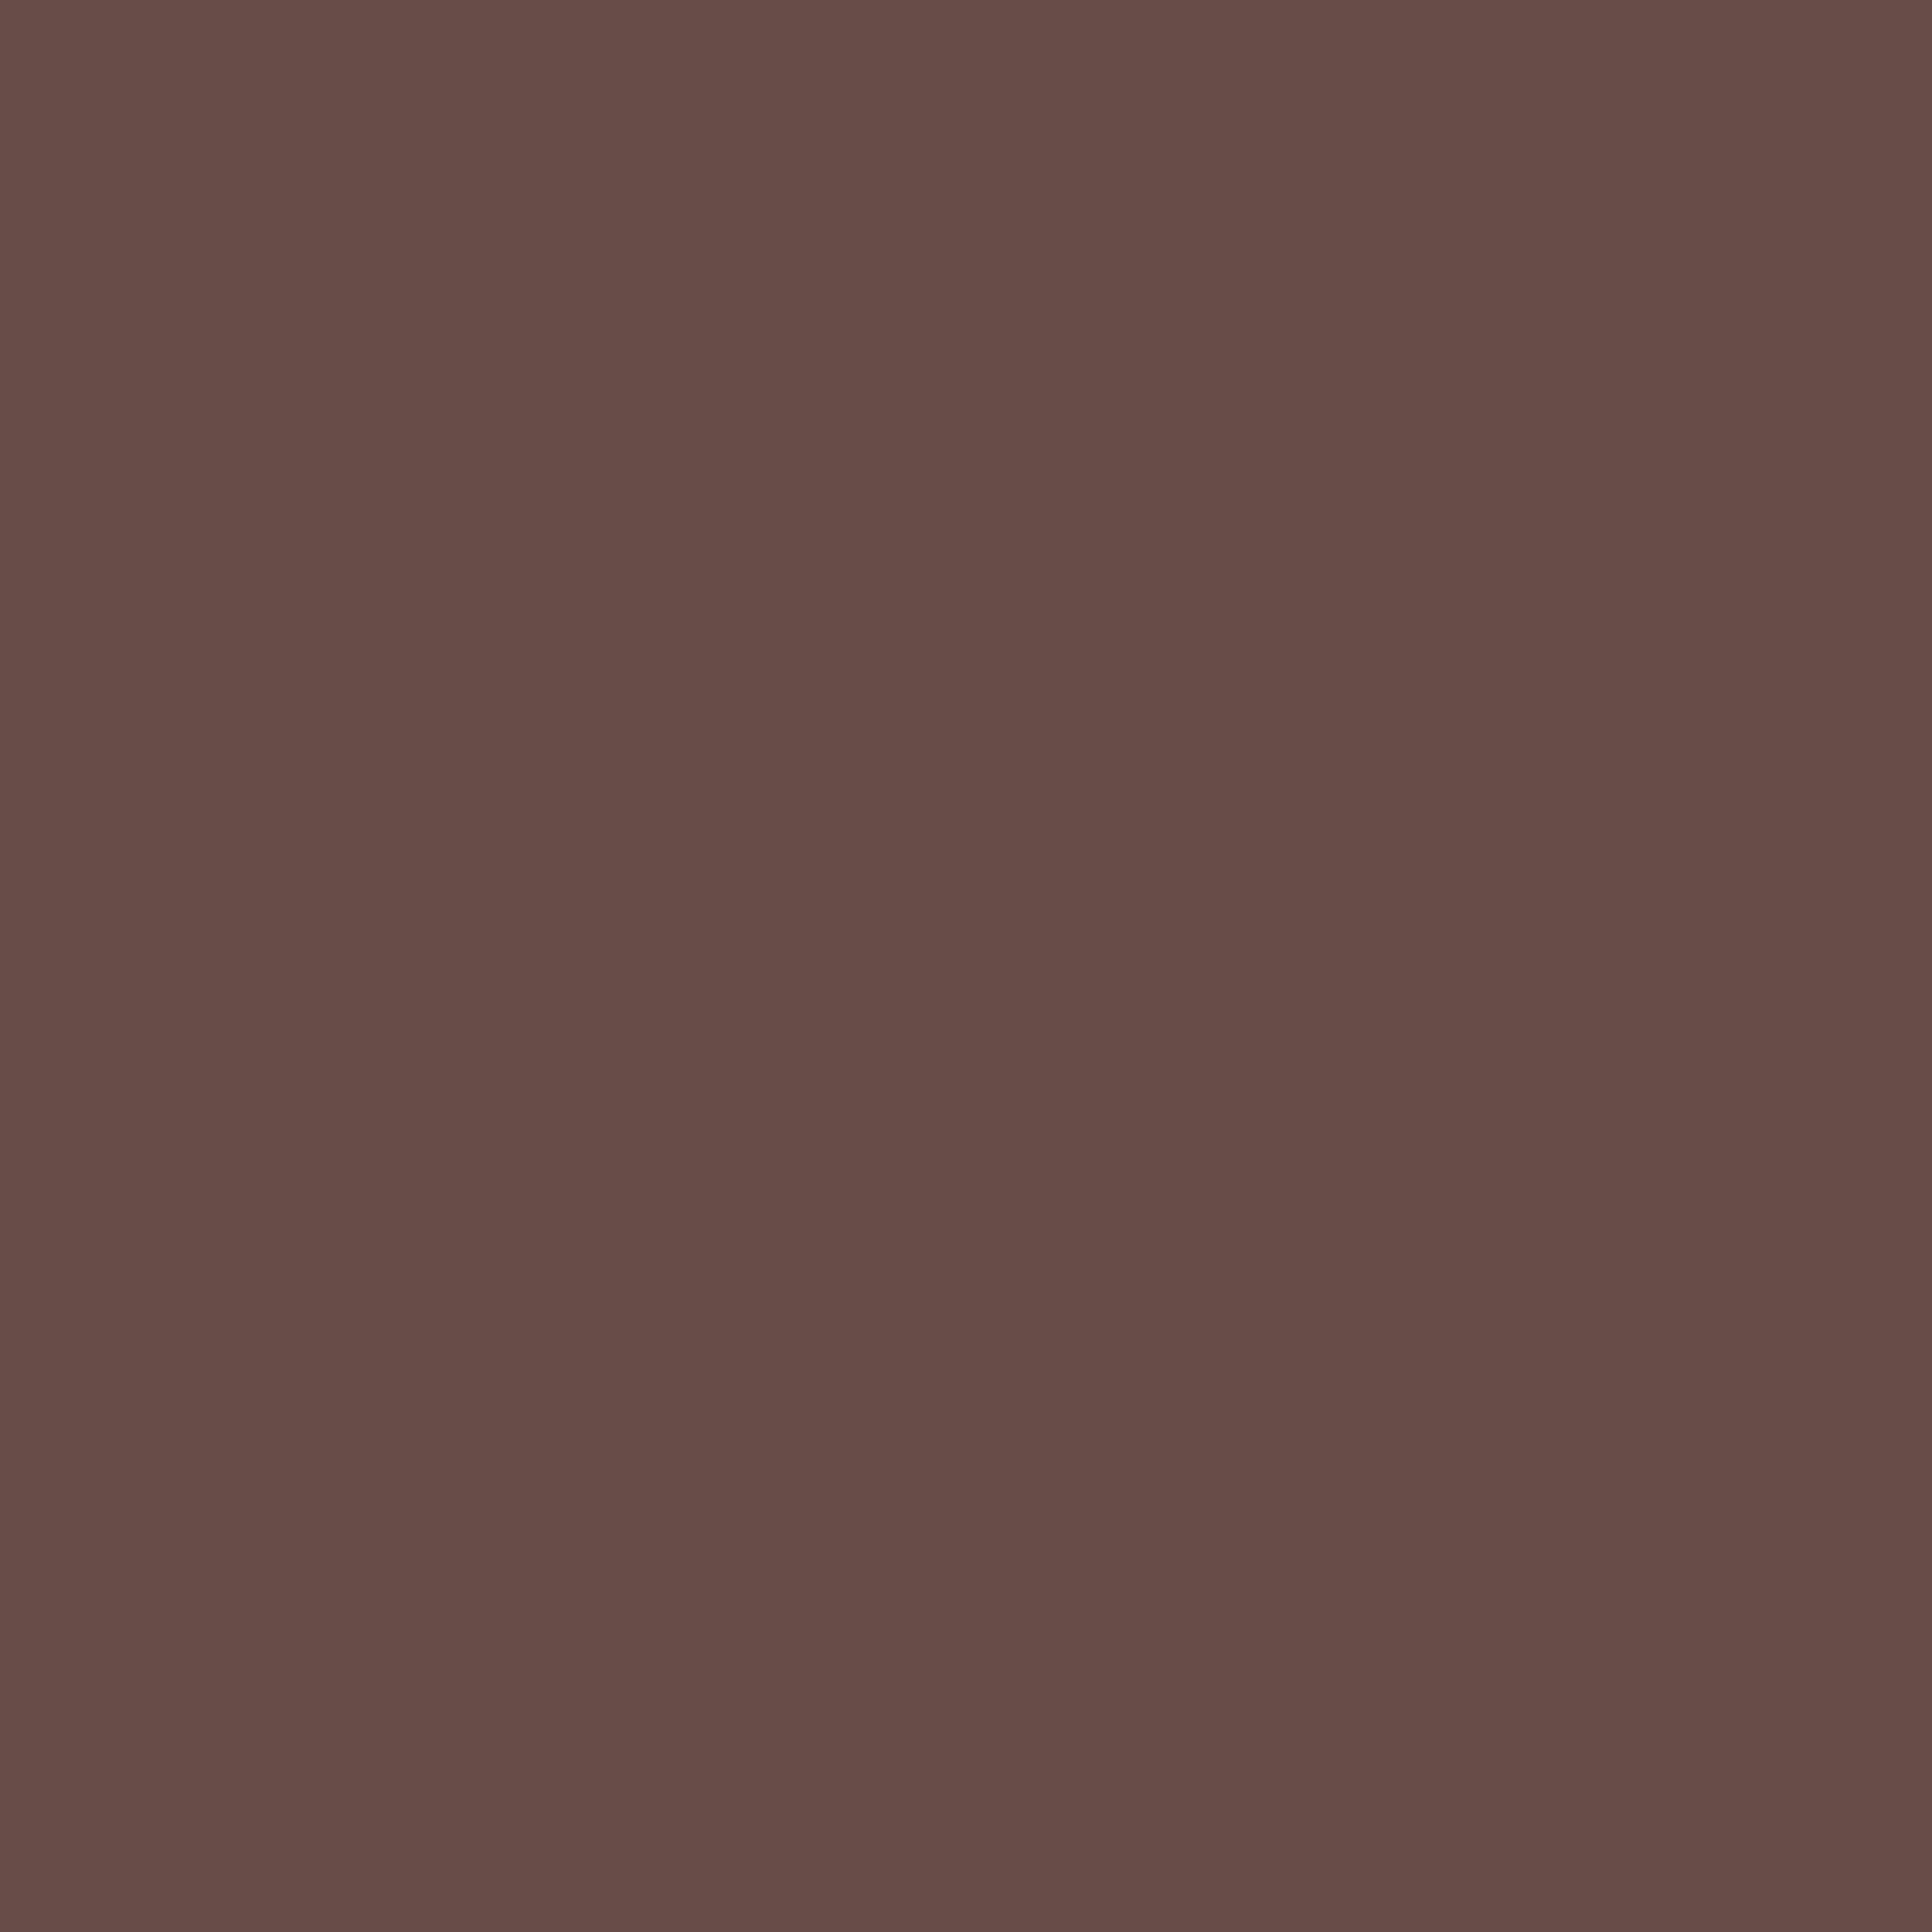 2732x2732 Medium Taupe Solid Color Background